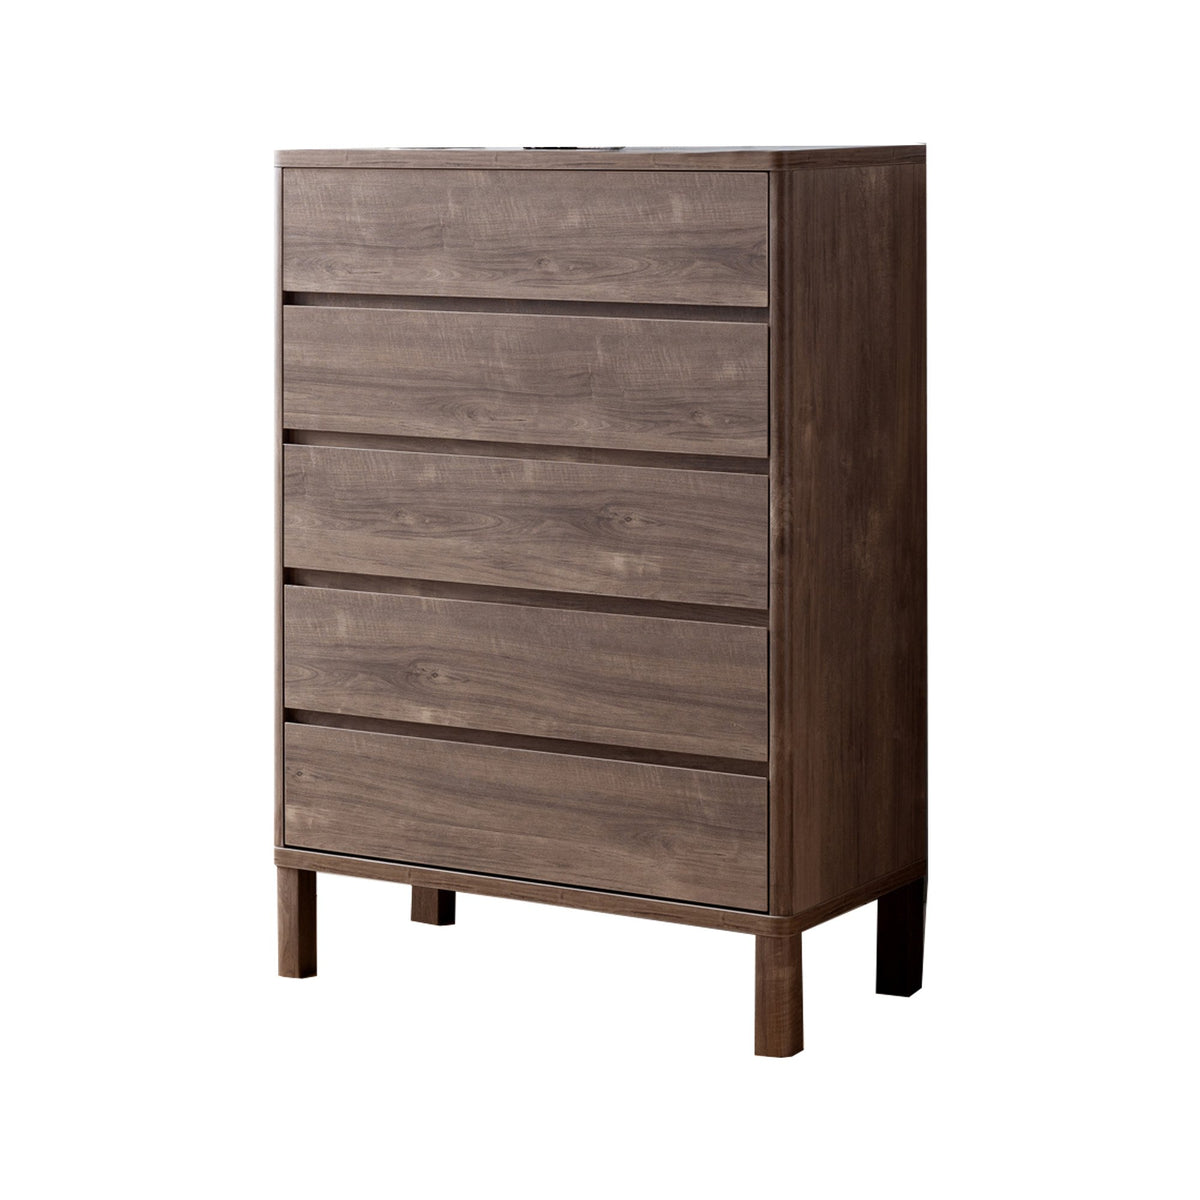 Grained Wooden Frame Chest with 5 Drawers and Straight Legs, Hazelnut Brown - BM214678